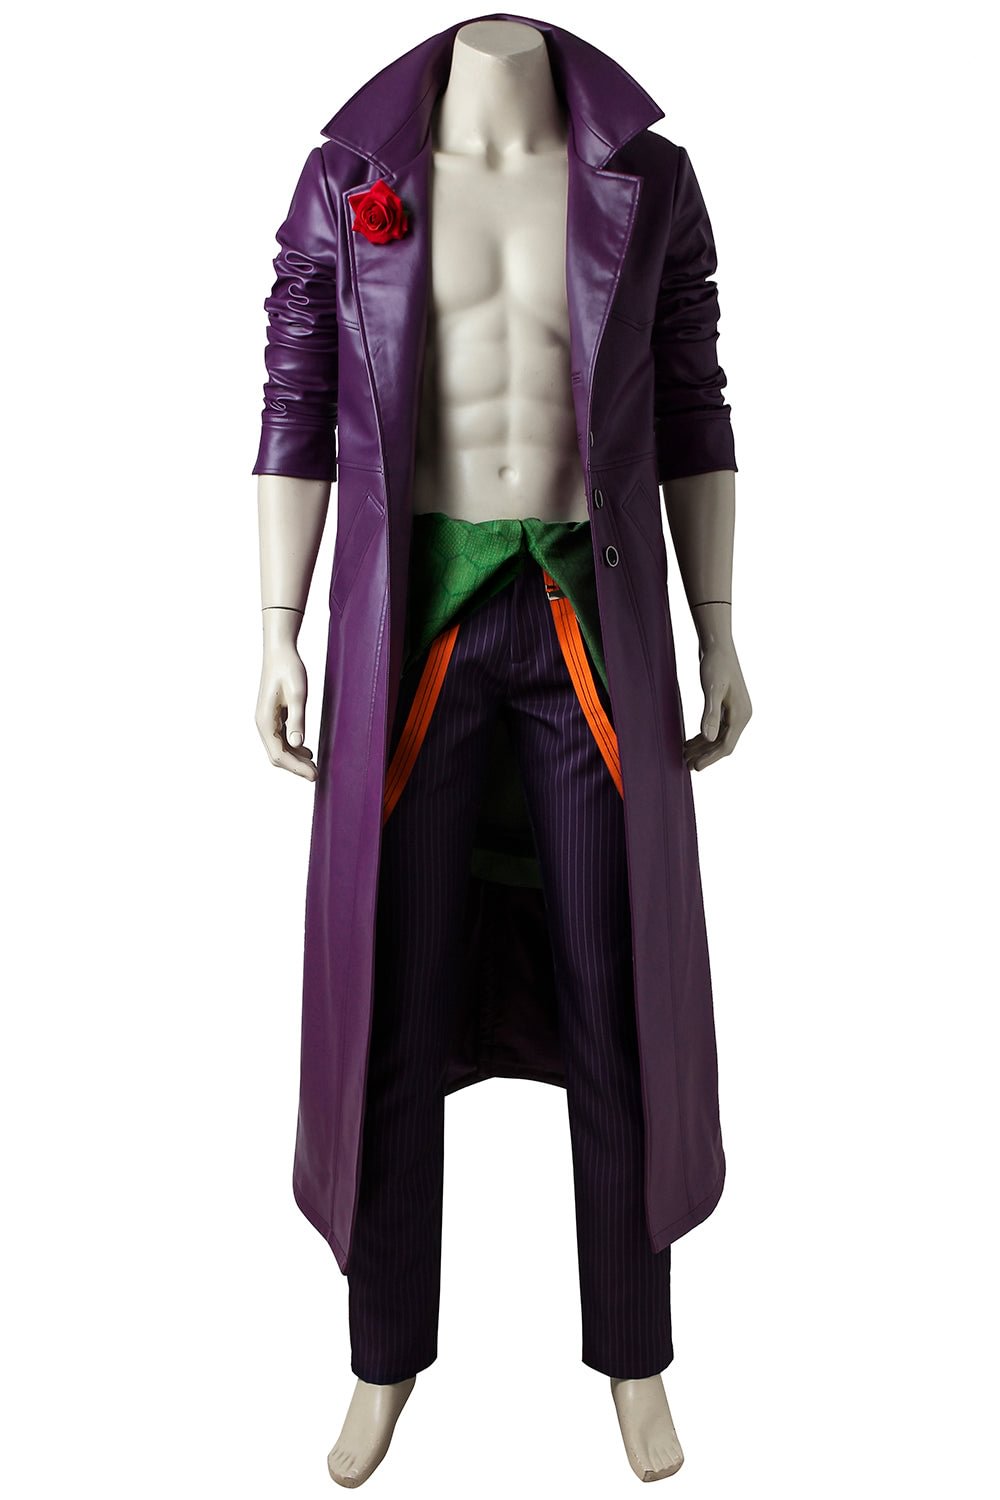 DC Injustice 2 Joker Outfits Cosplay Costume